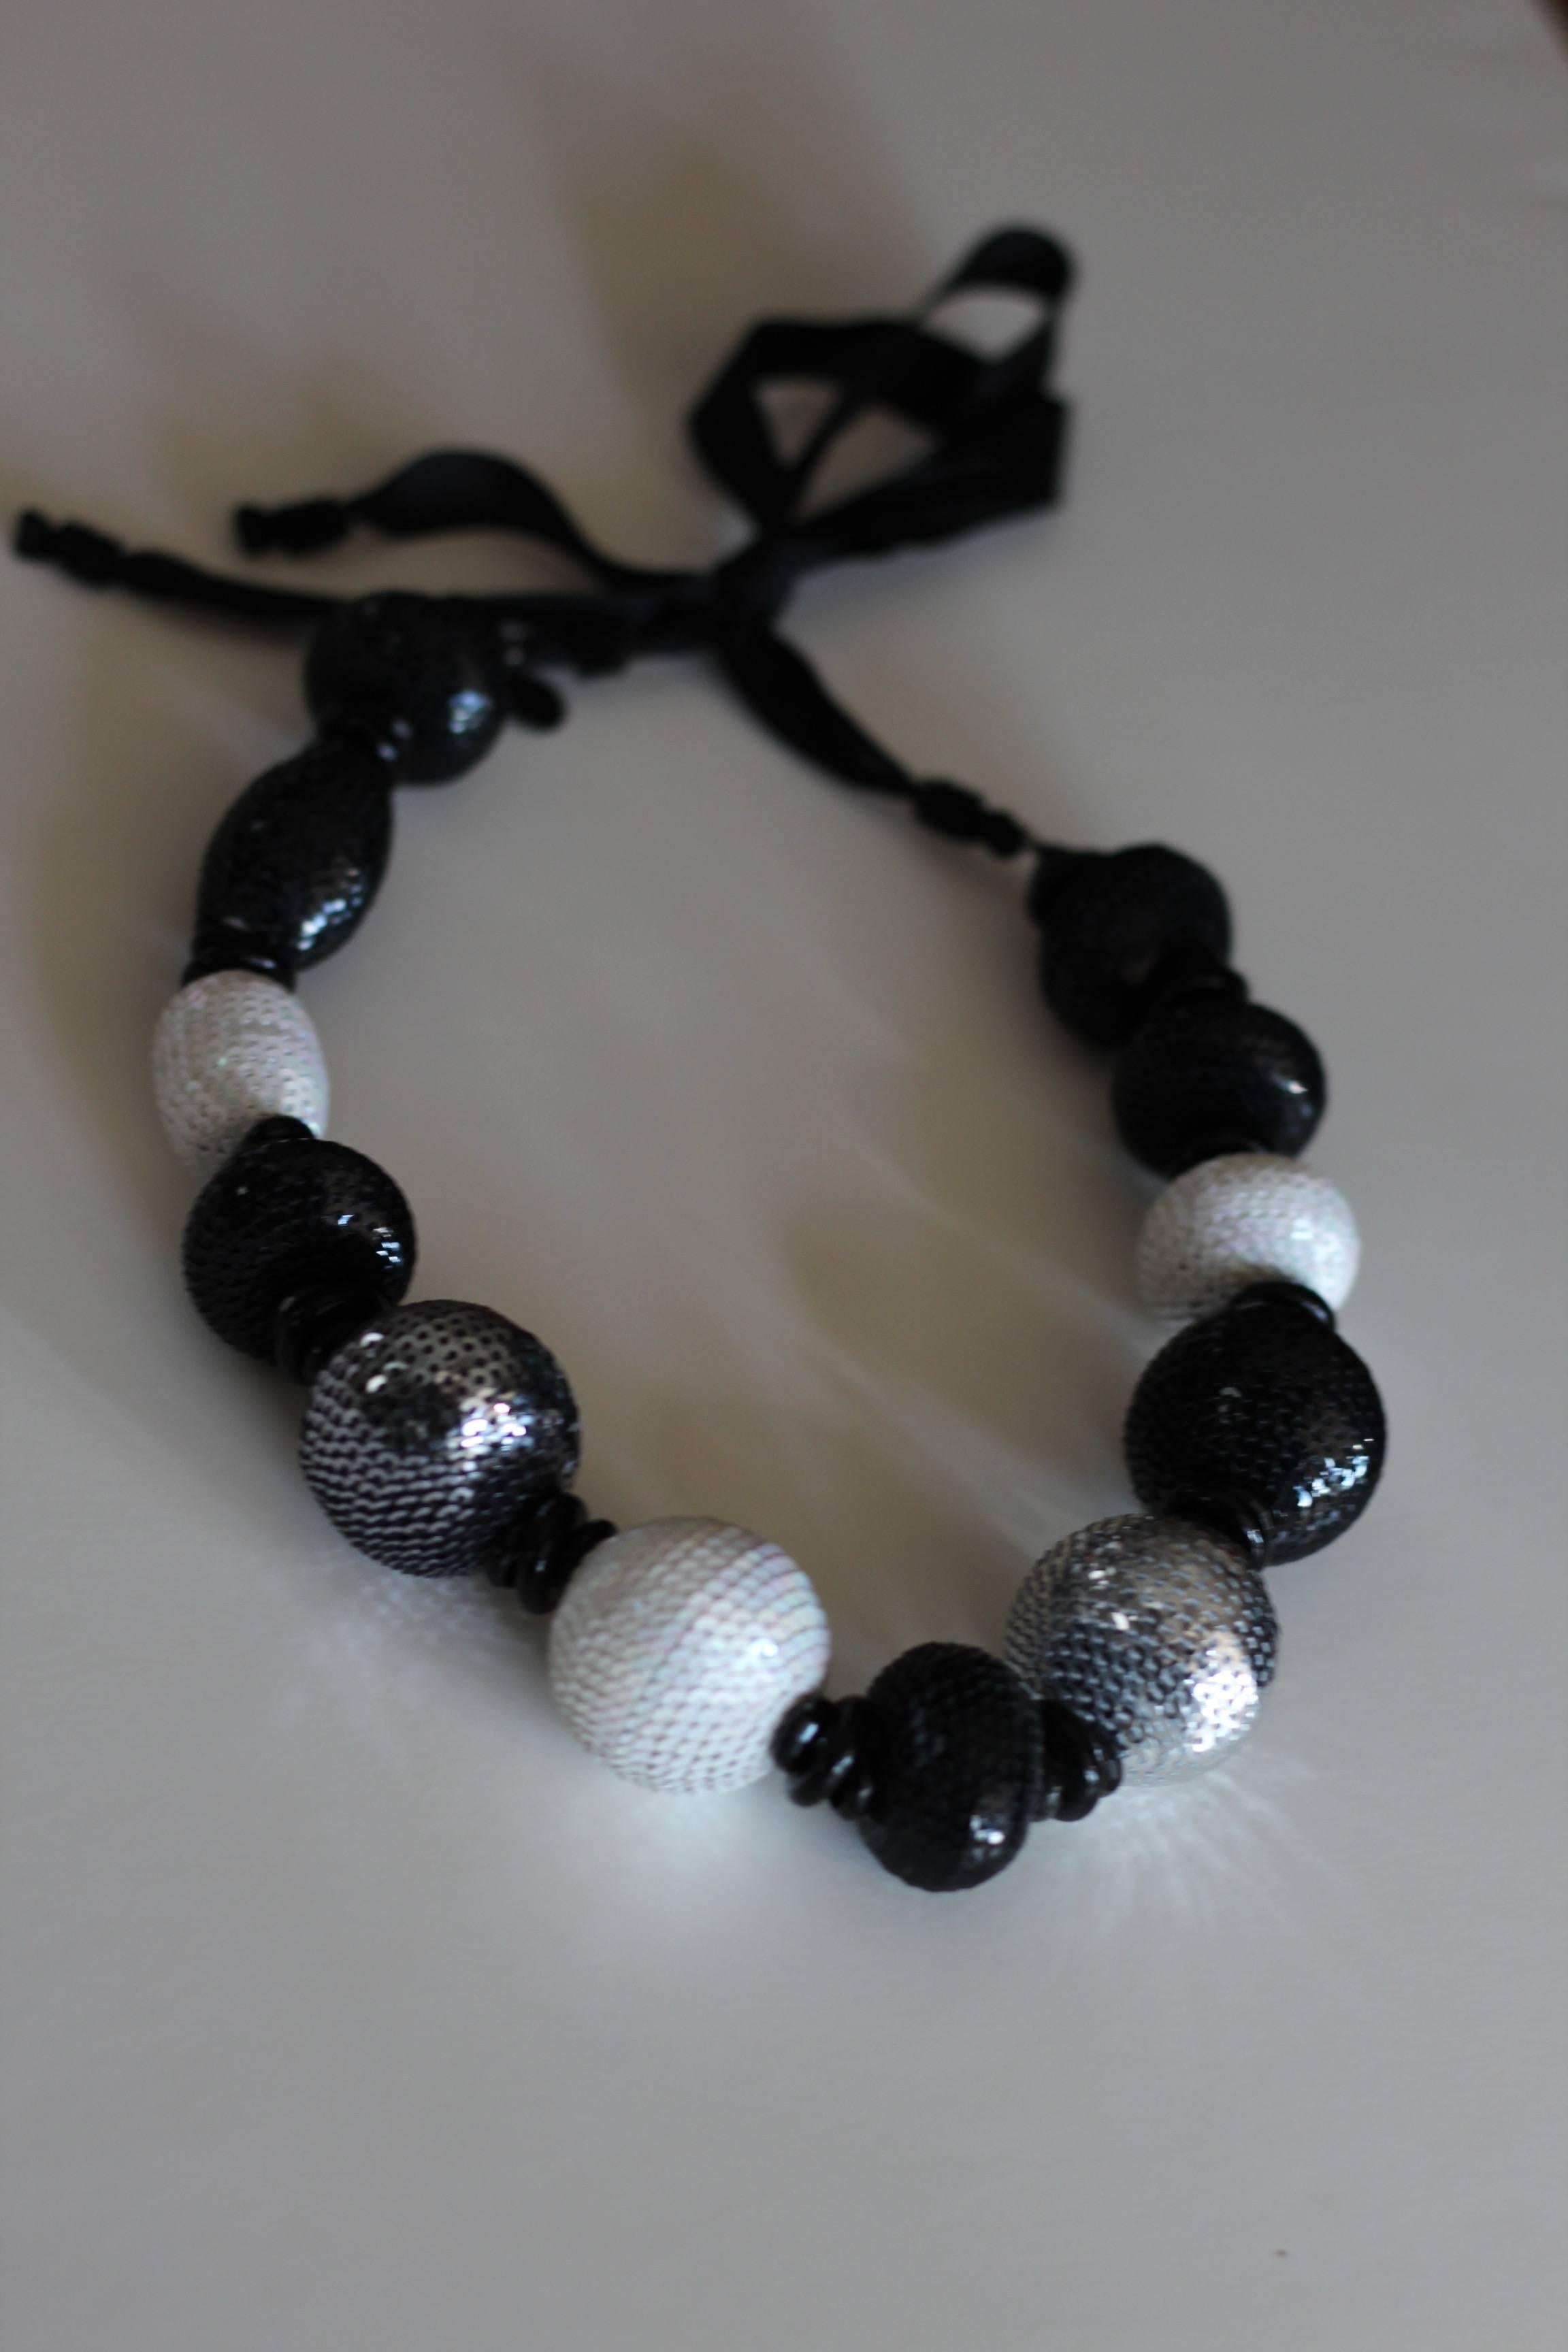 Shine bright this holiday season in this stunning 1980s Gucci Paillette Ball Necklace. Hand sewn piallettes in shades of black, silver and white decorate various sized balls in this statement necklace. Tied together with a black grosgrain ribbon,